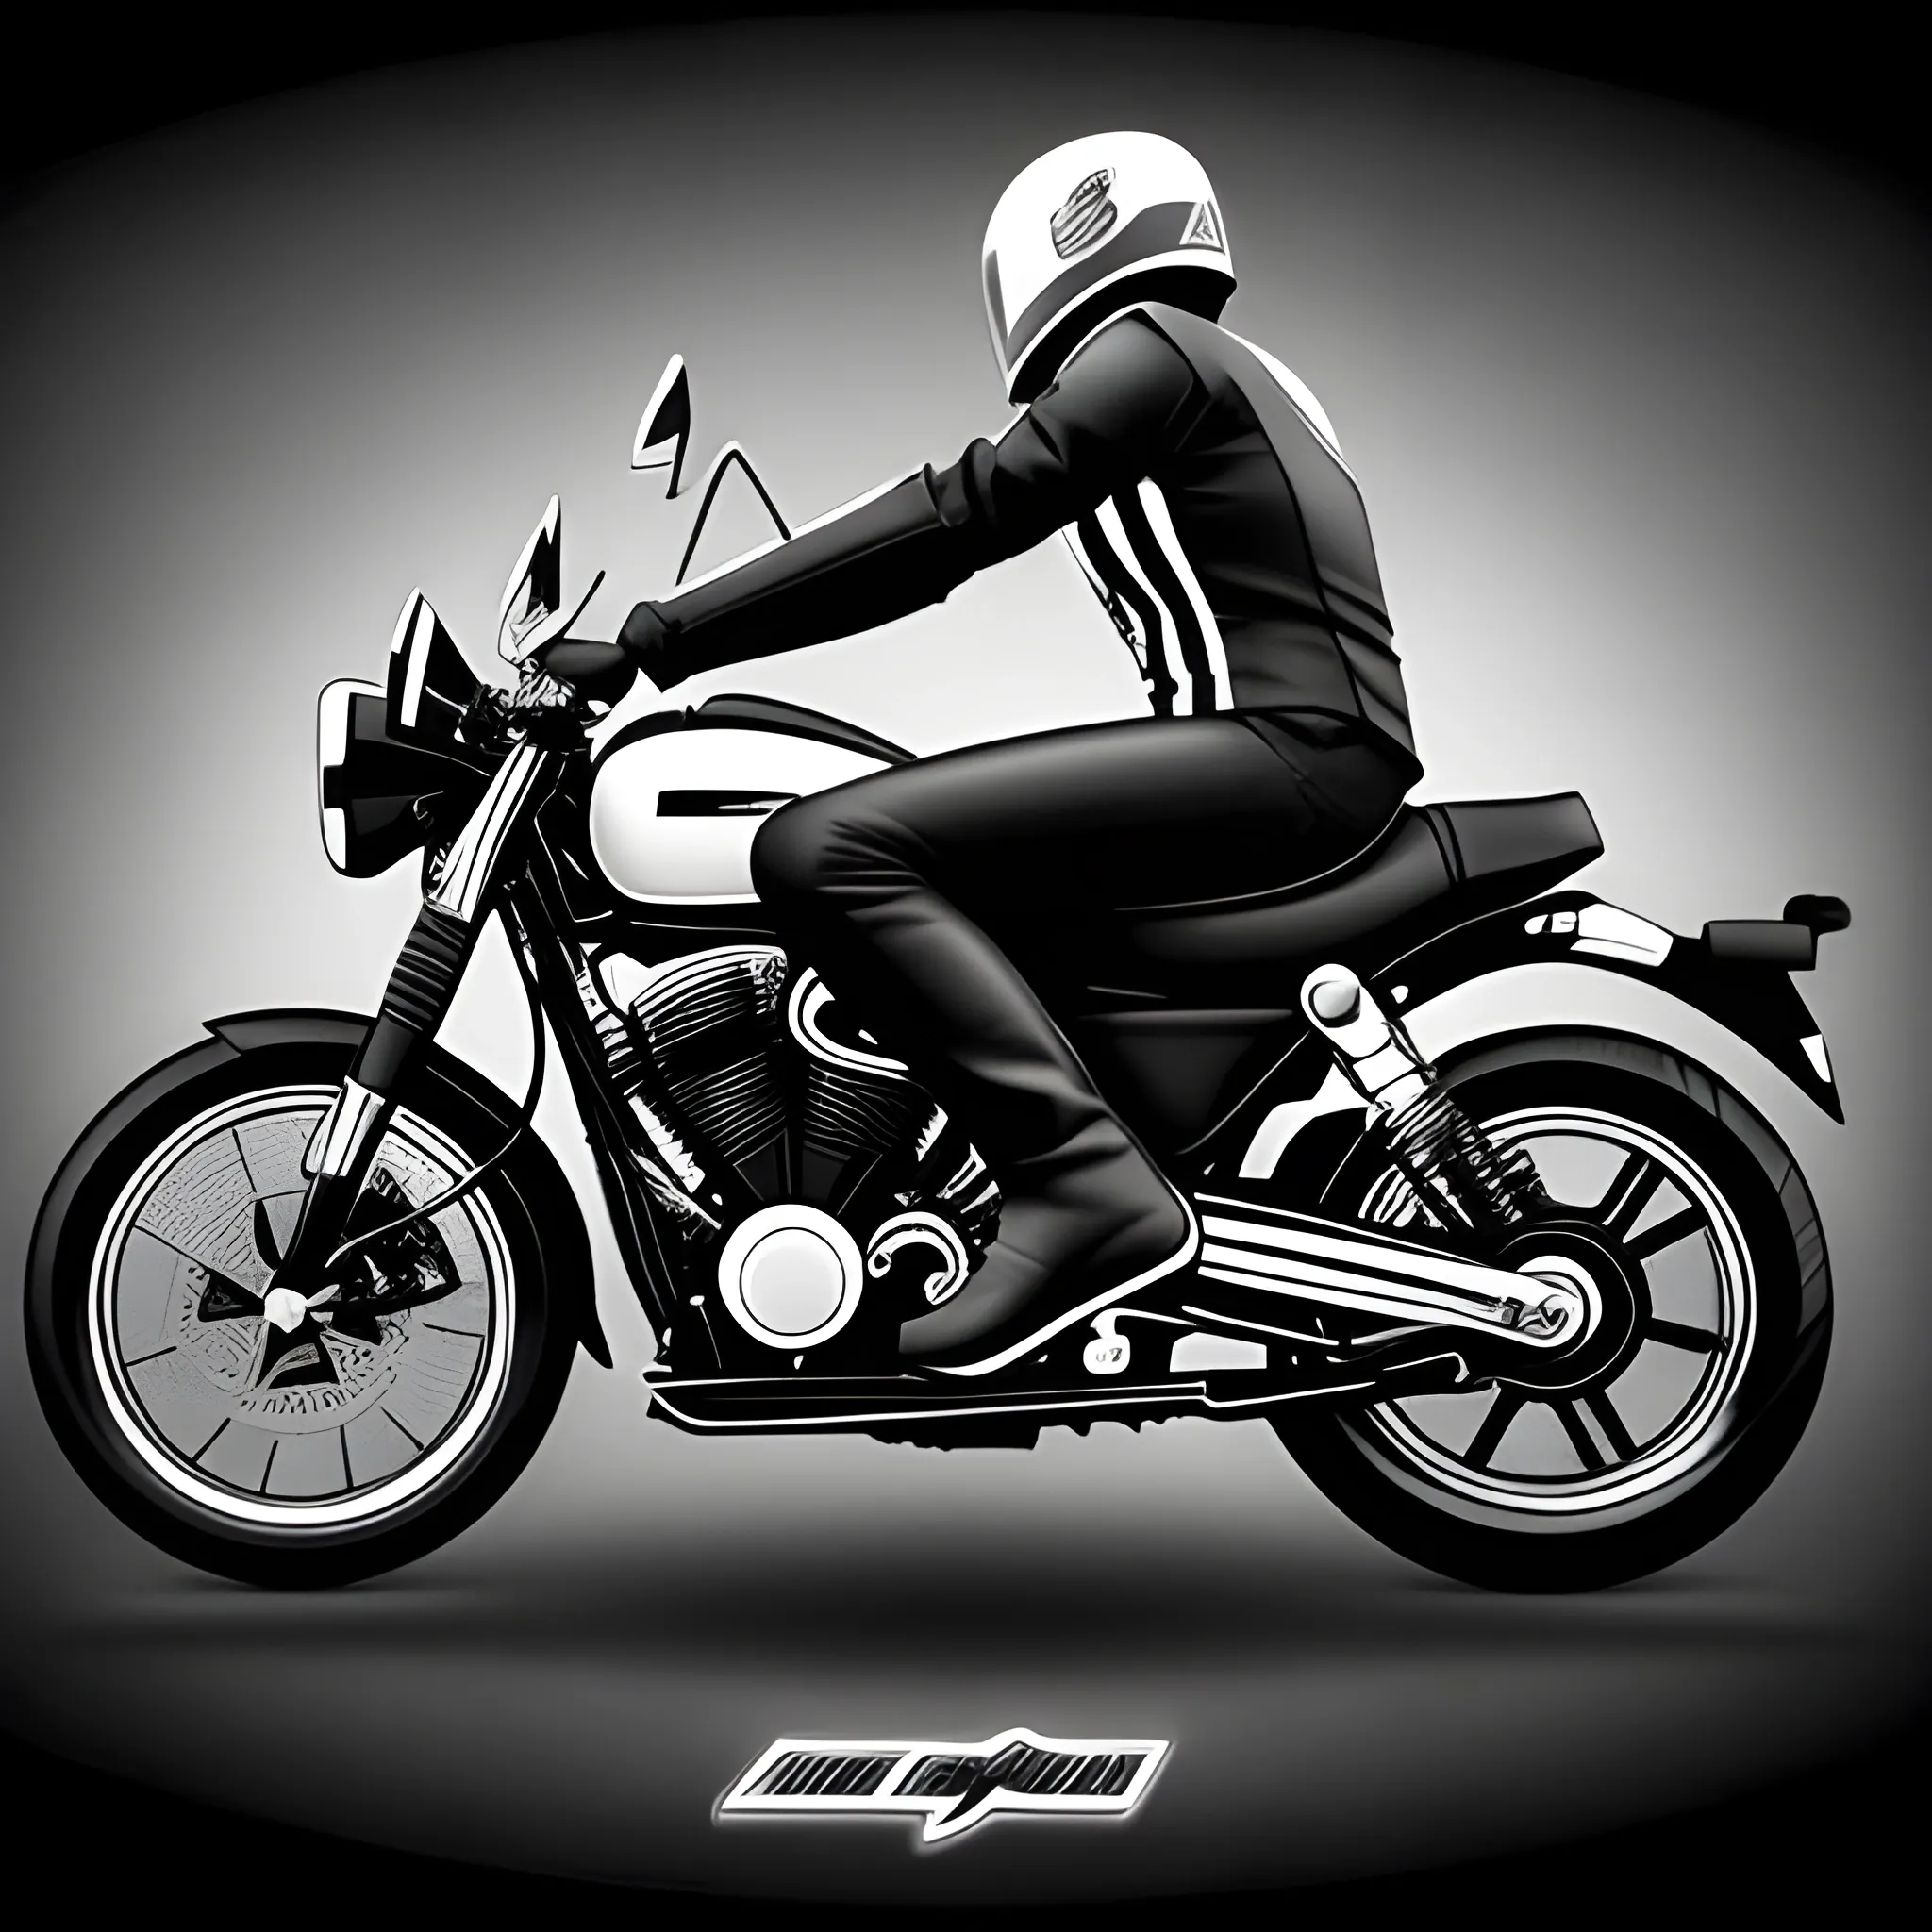 motor rider, side view, black and white, logo